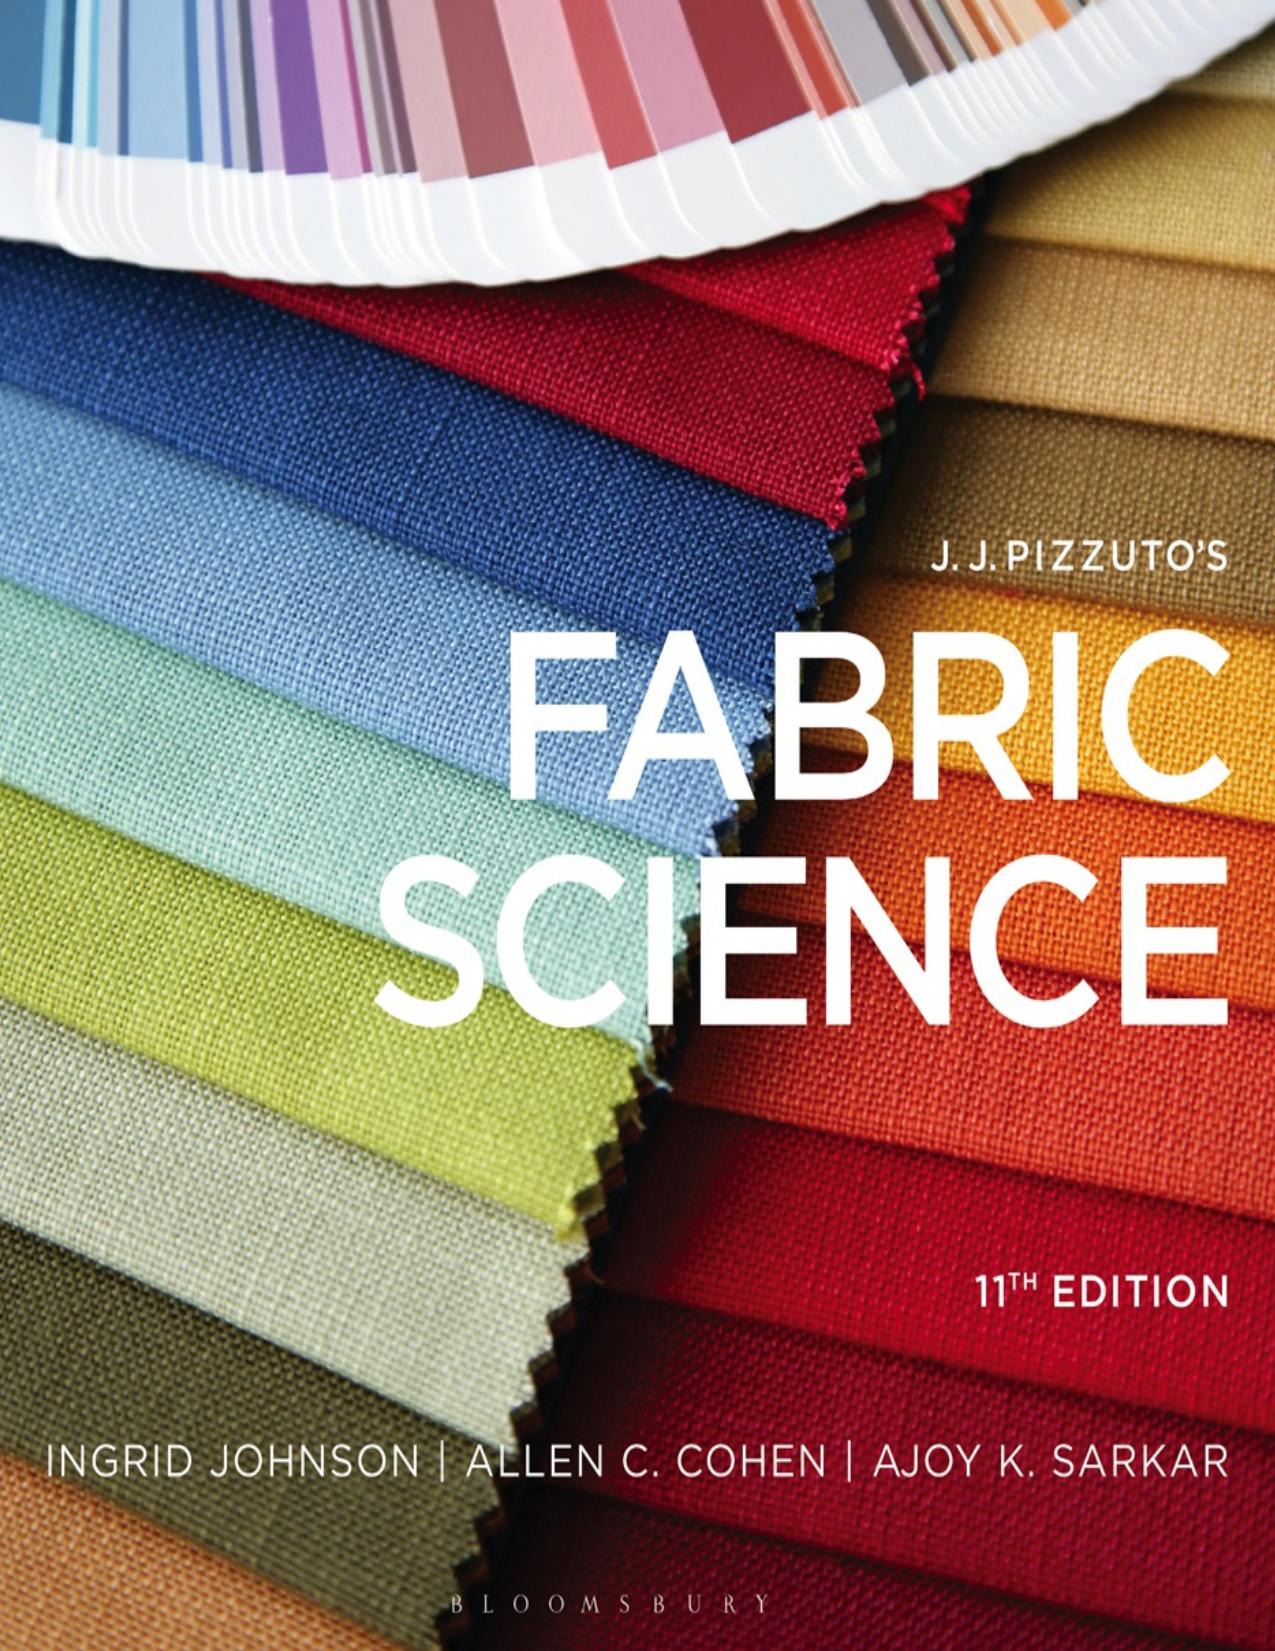 J.J. Pizzuto's Fabric Science 11th Edition by Ingrid Johnson - Vitalsource Download.jpg